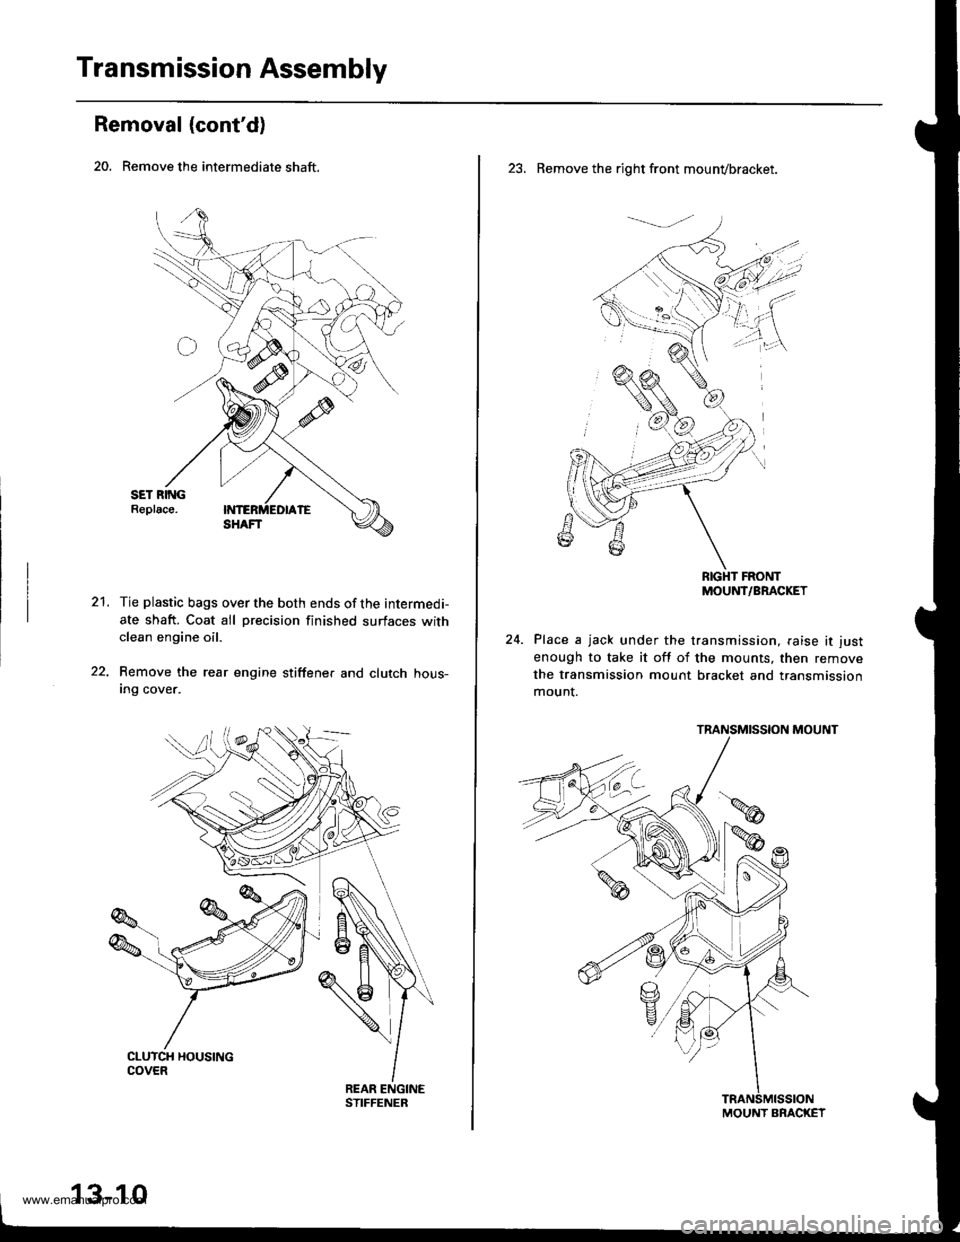 HONDA CR-V 1997 RD1-RD3 / 1.G Workshop Manual 
Transmission Assembly
Removal (contd)
20. Remove the intermediate shaft.
21.Tie plastic bags over the both ends of the intermedi-
ate shaft. Coat all precision finished surfaces withclean engine oil